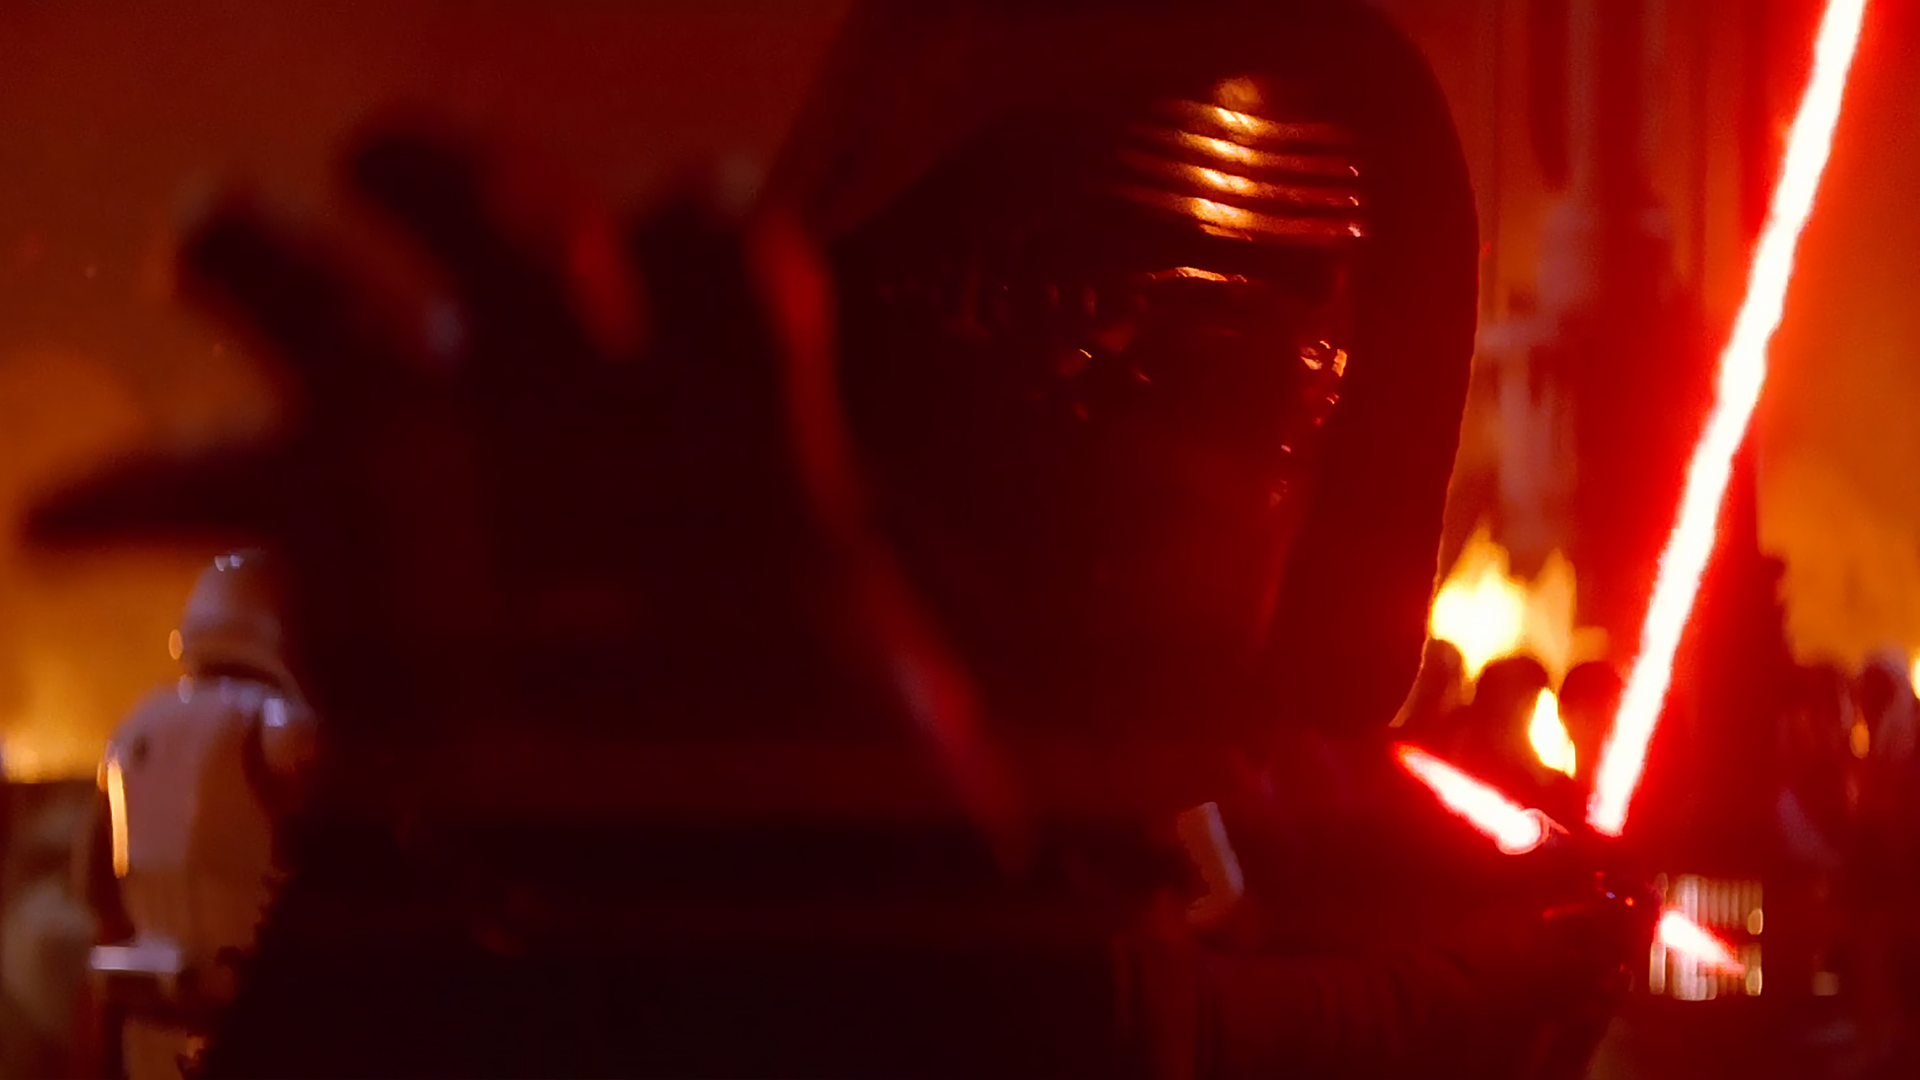 Cool Force Awakens Pictures Kylo Ren fanboy here   Album on Imgur